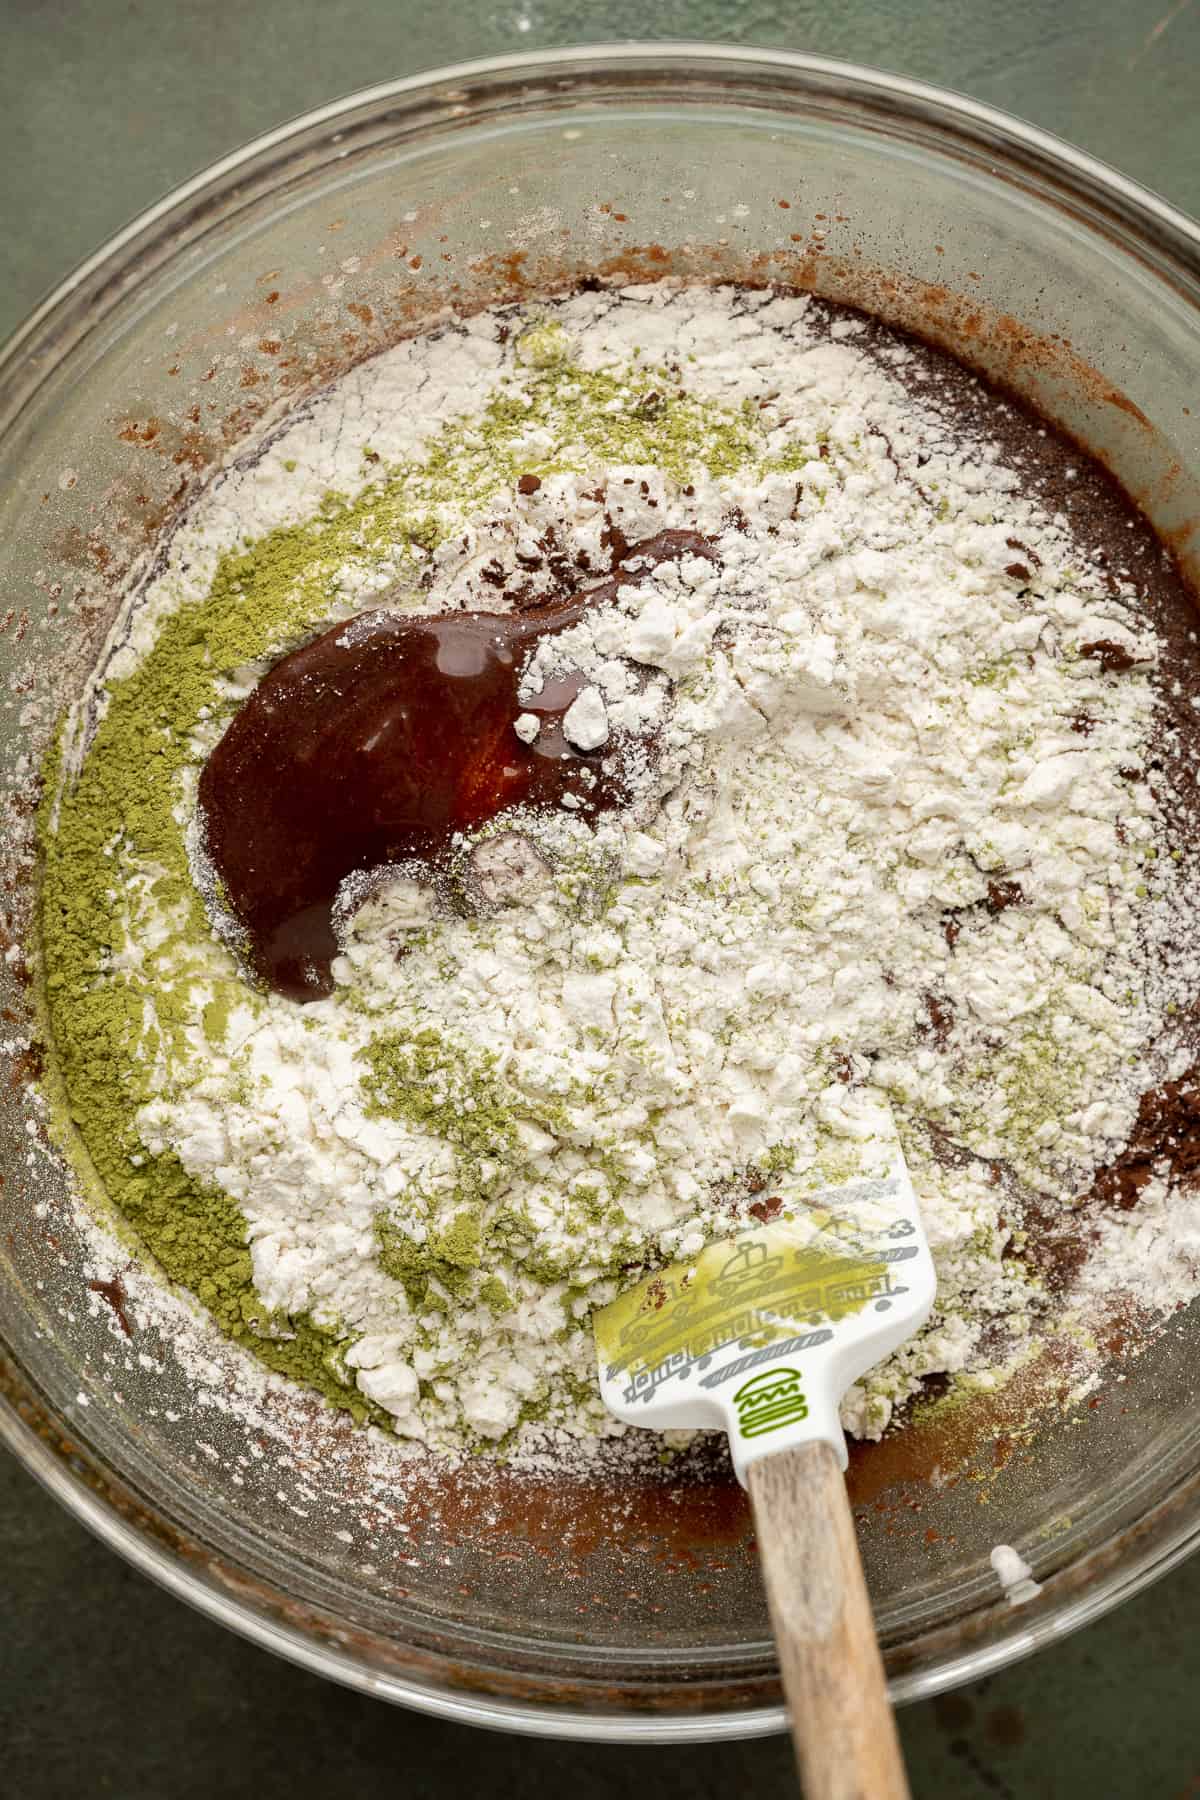 flour, matcha powder, and cocoa powder added to the wet ingredients of brownie batter.